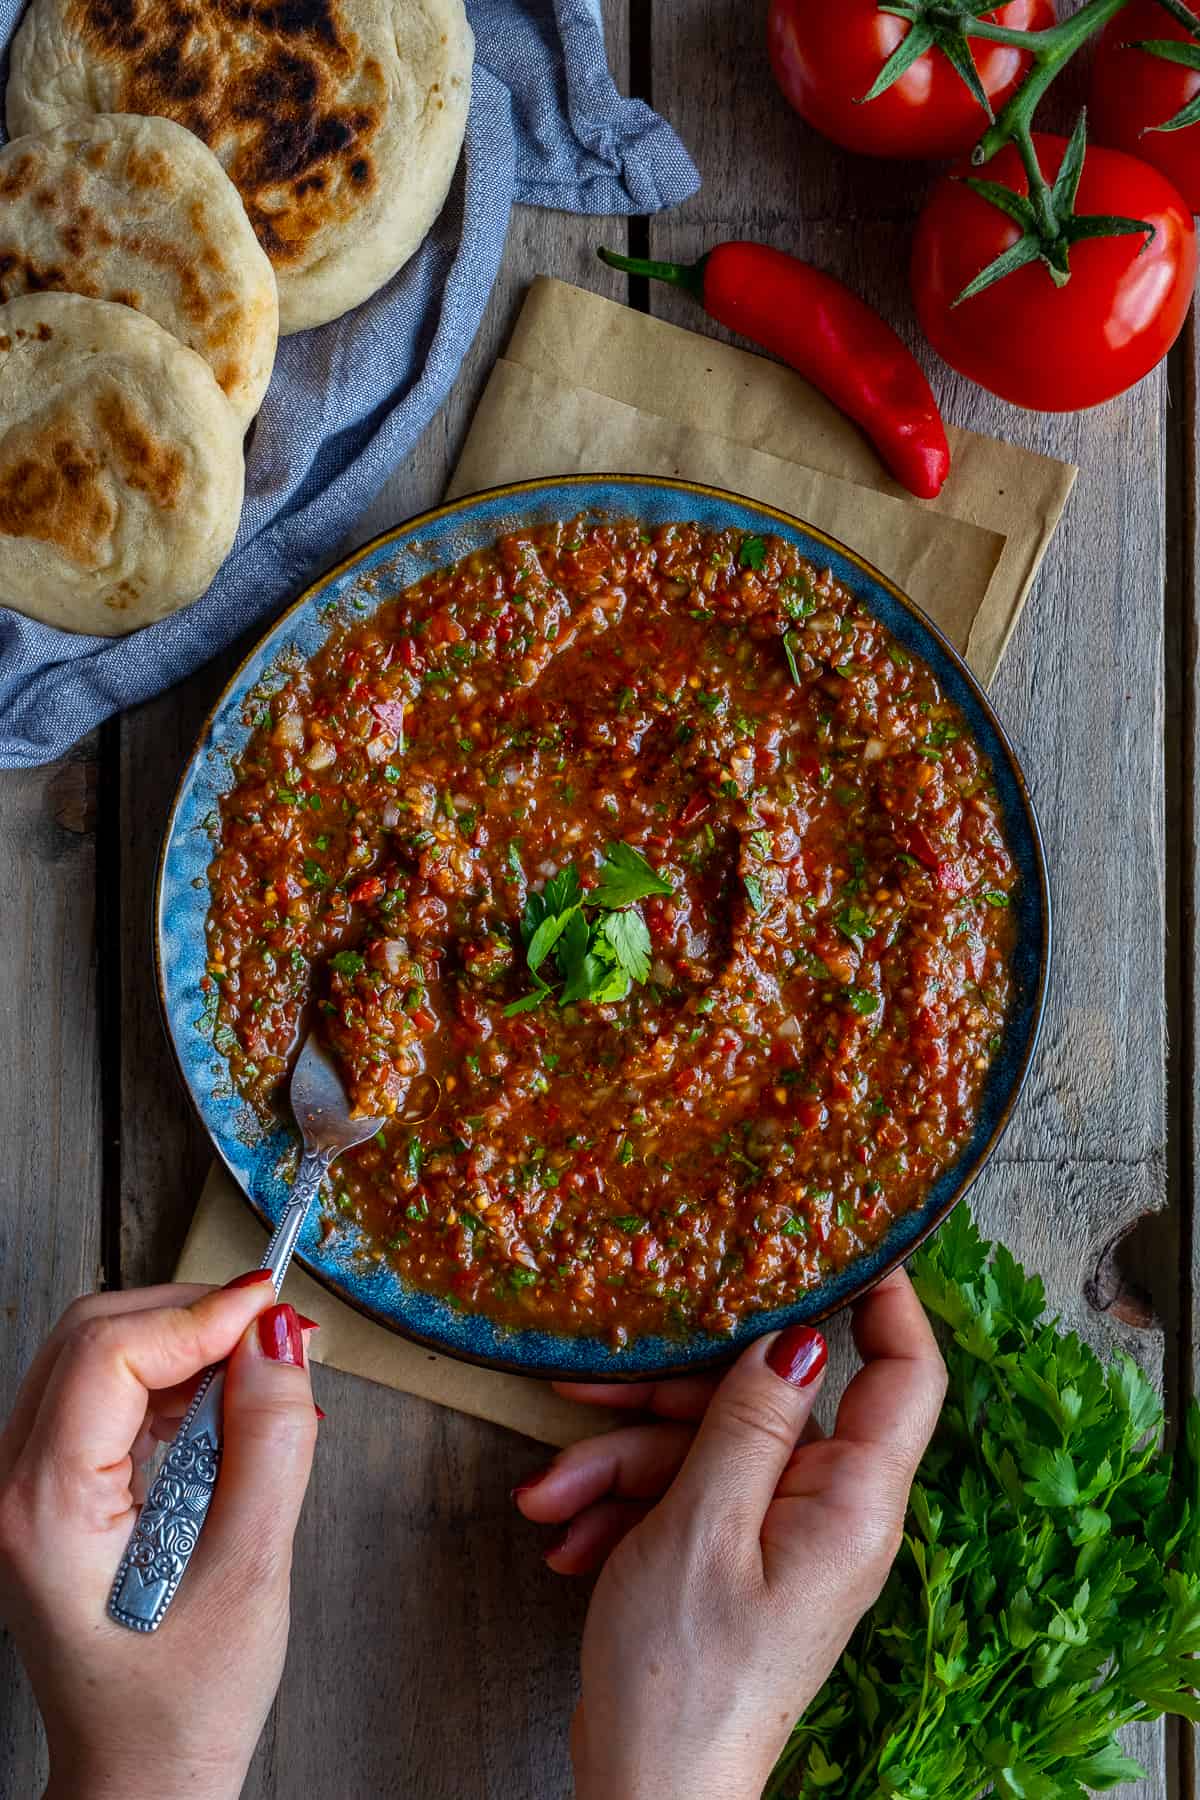 Hands holding a plate loaded with ezme dip and taking some of it with a fork, a red chili pepper, tomatoes, parsley and flatbreads on the side.